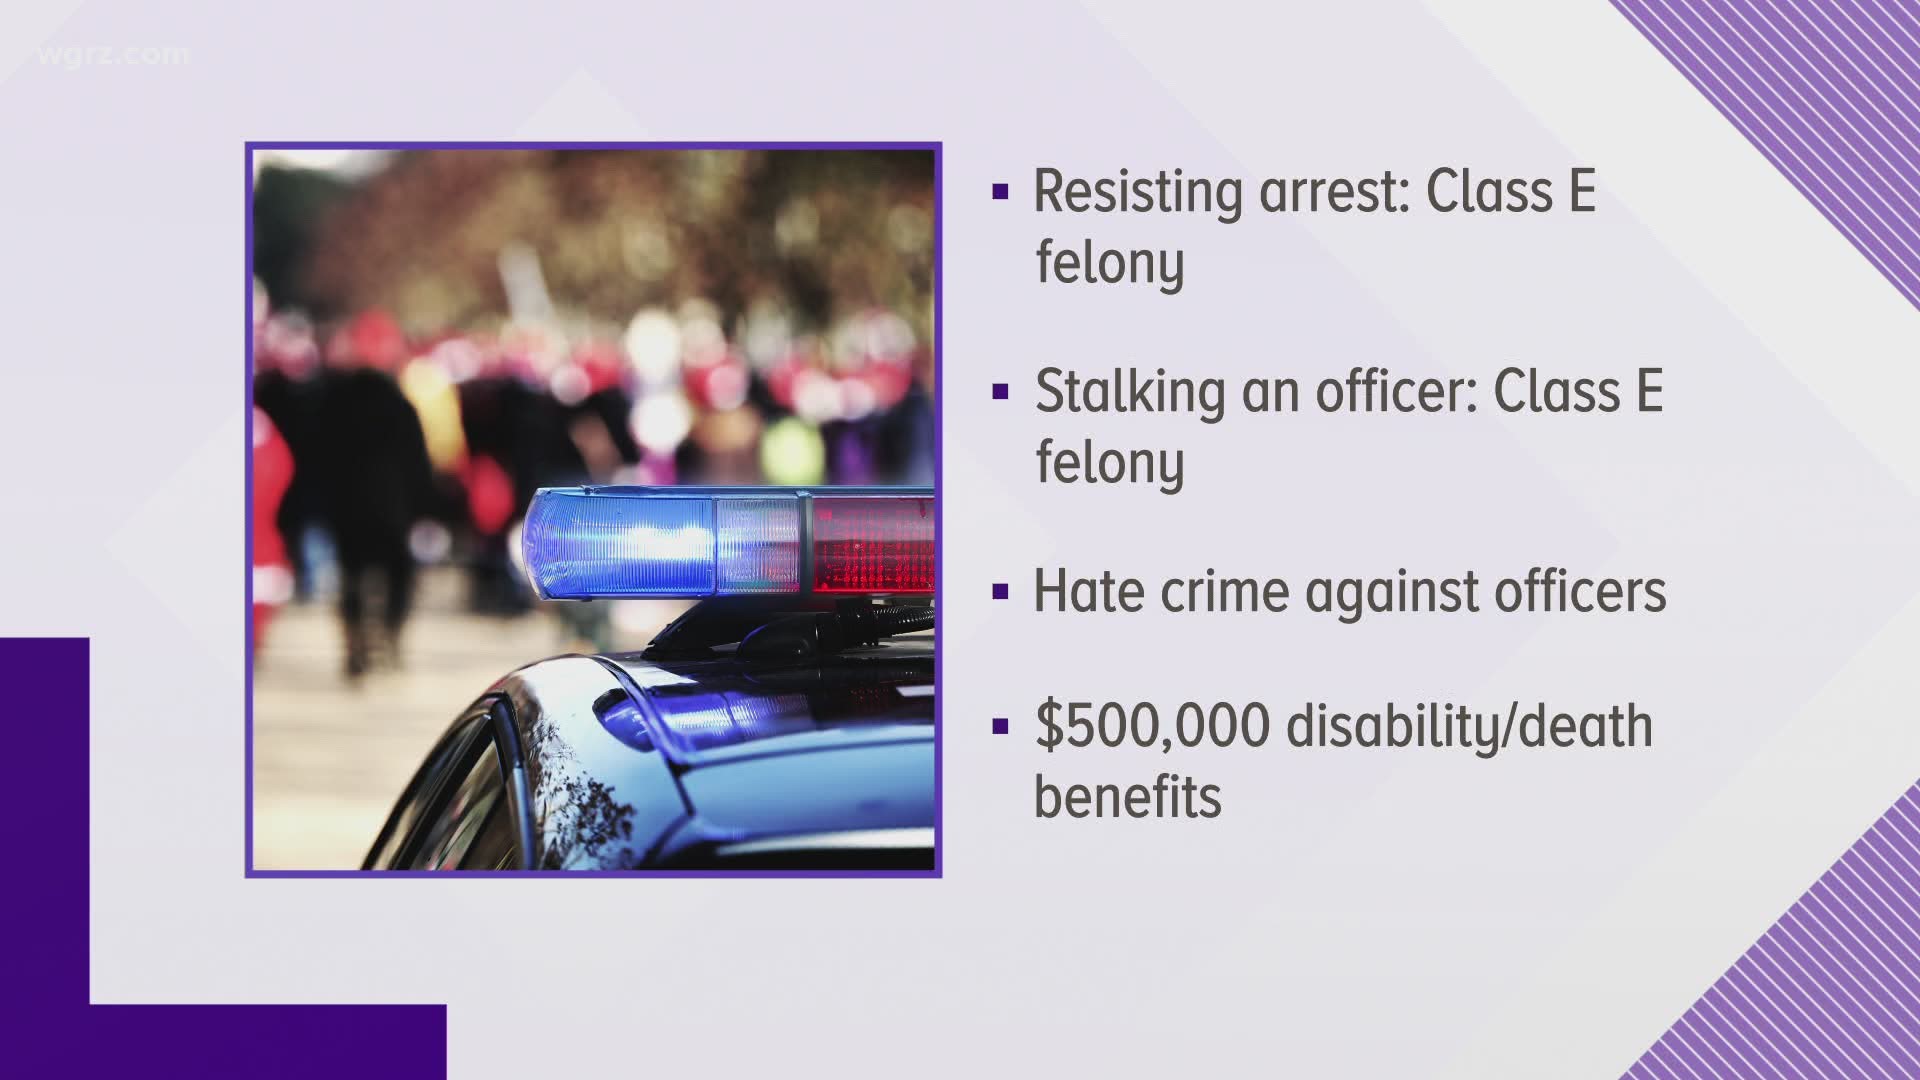 Among other things, resisting arrest would become a felony if the proposals become laws.